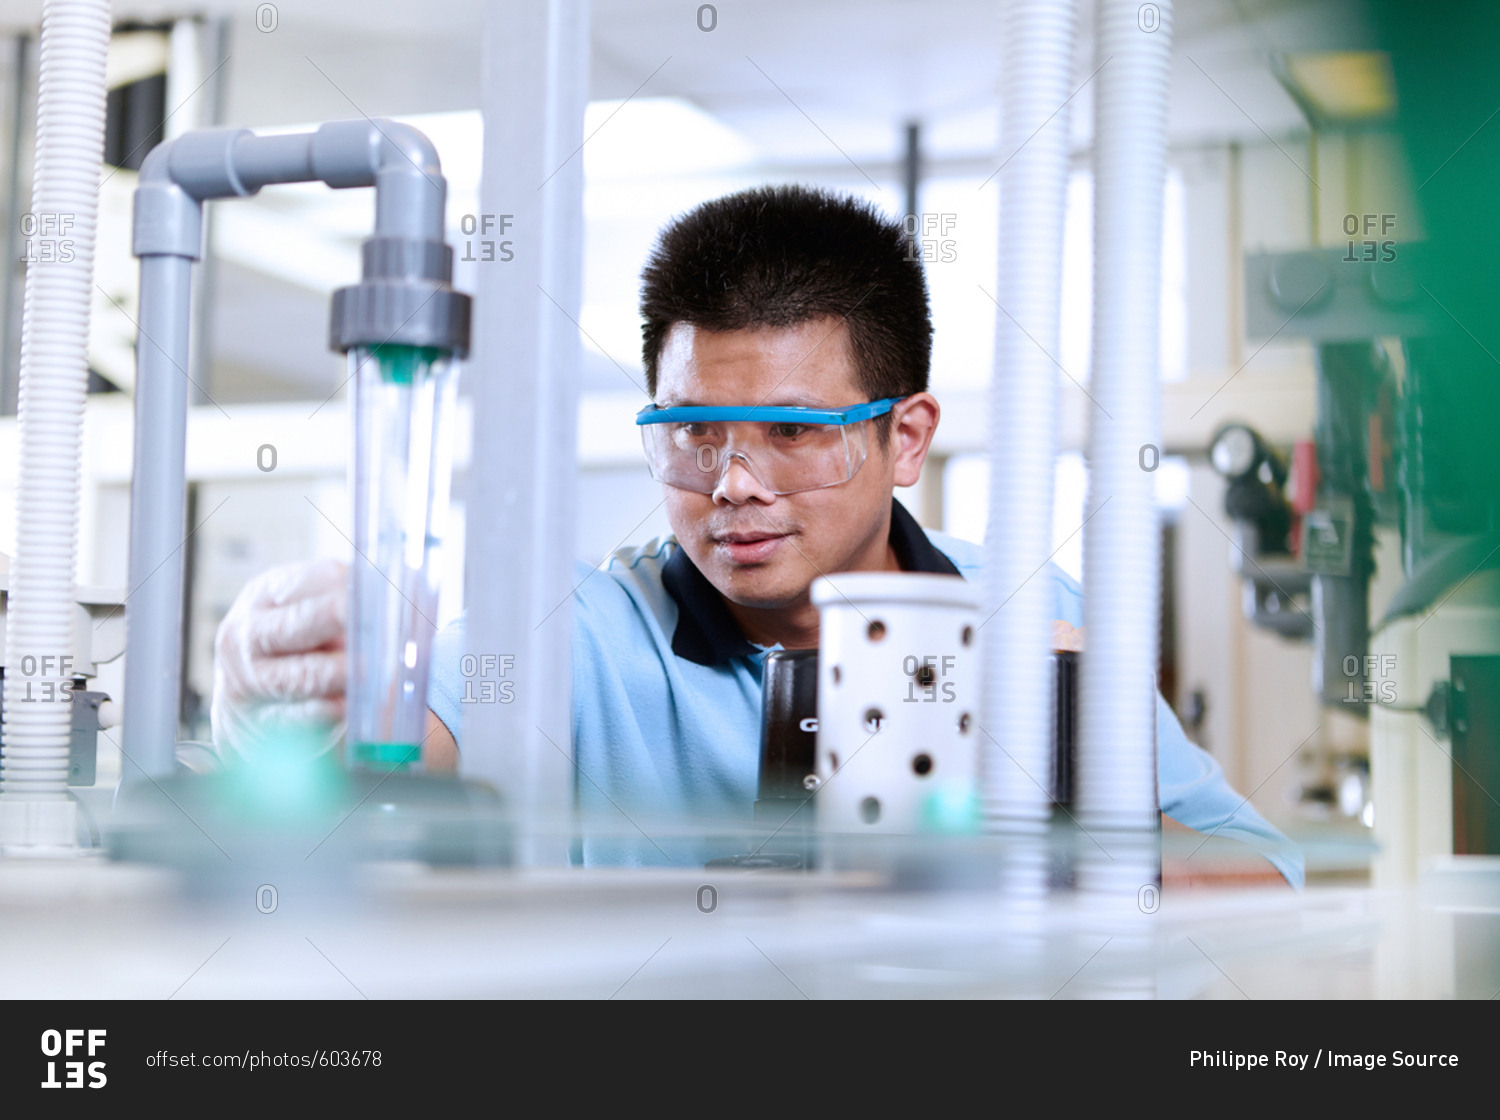 Man wearing safety goggles in flexible electronics plant